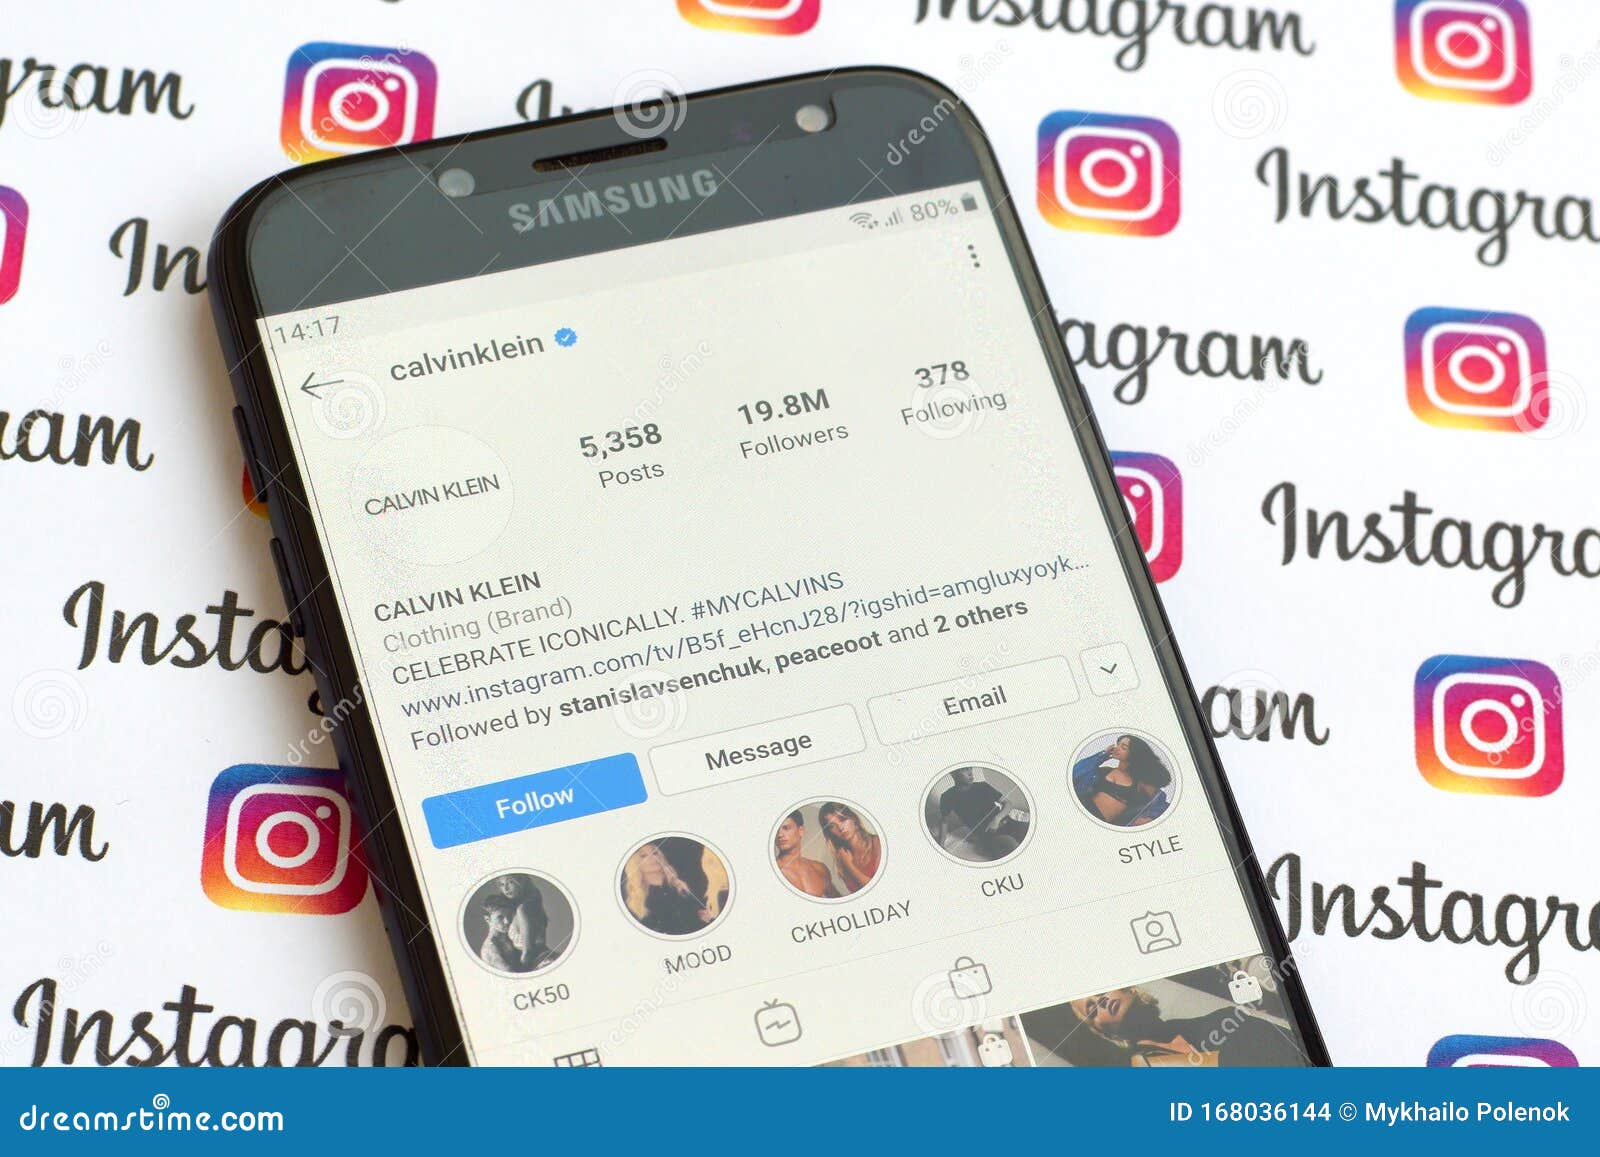 Calvin Klein Official Instagram Account on Smartphone Screen on Paper  Instagram Banner Editorial Stock Image - Image of advertising, brand:  168036144